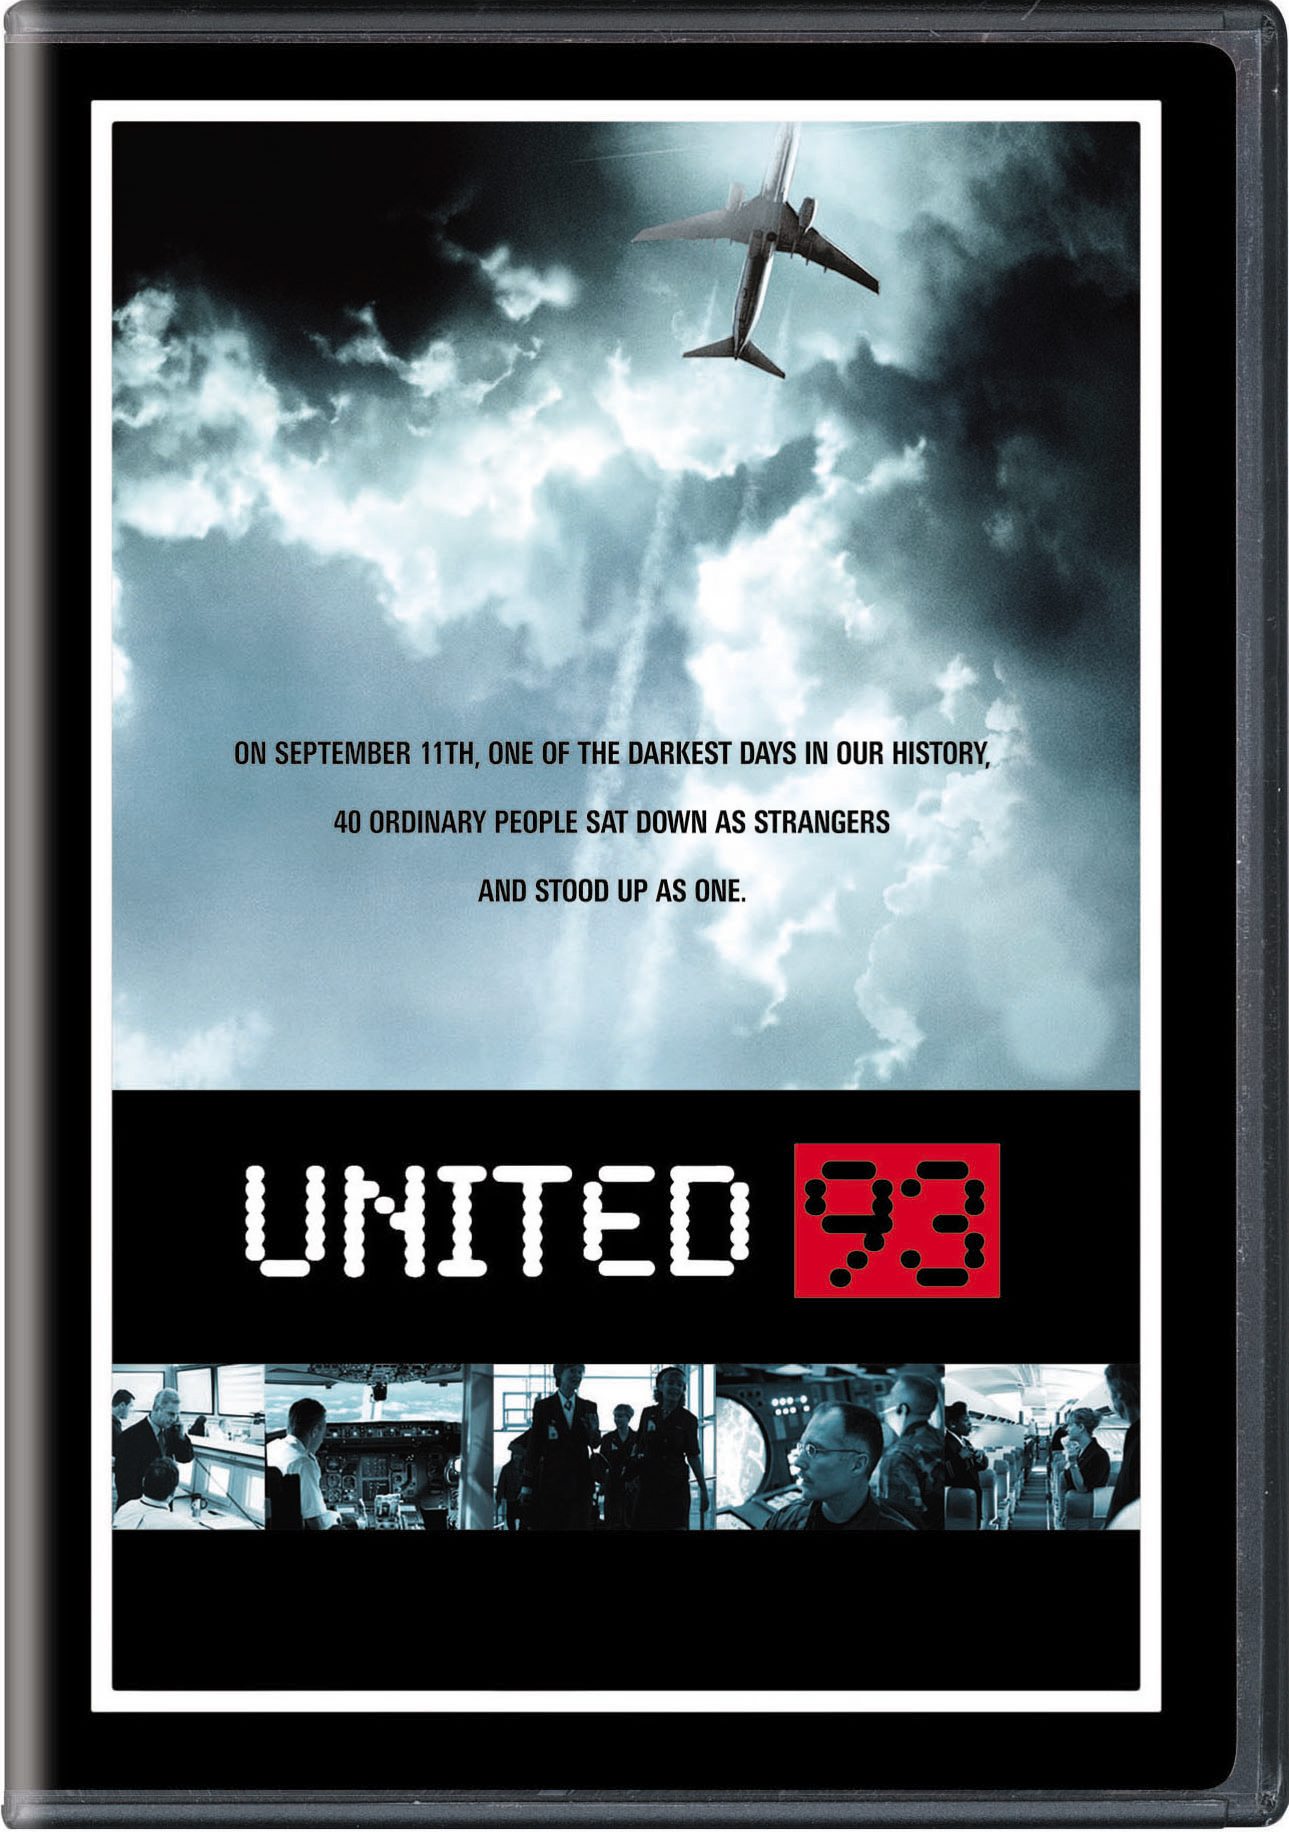 United 93 (DVD Widescreen) - DVD [ 2006 ]  - Drama Movies On DVD - Movies On GRUV